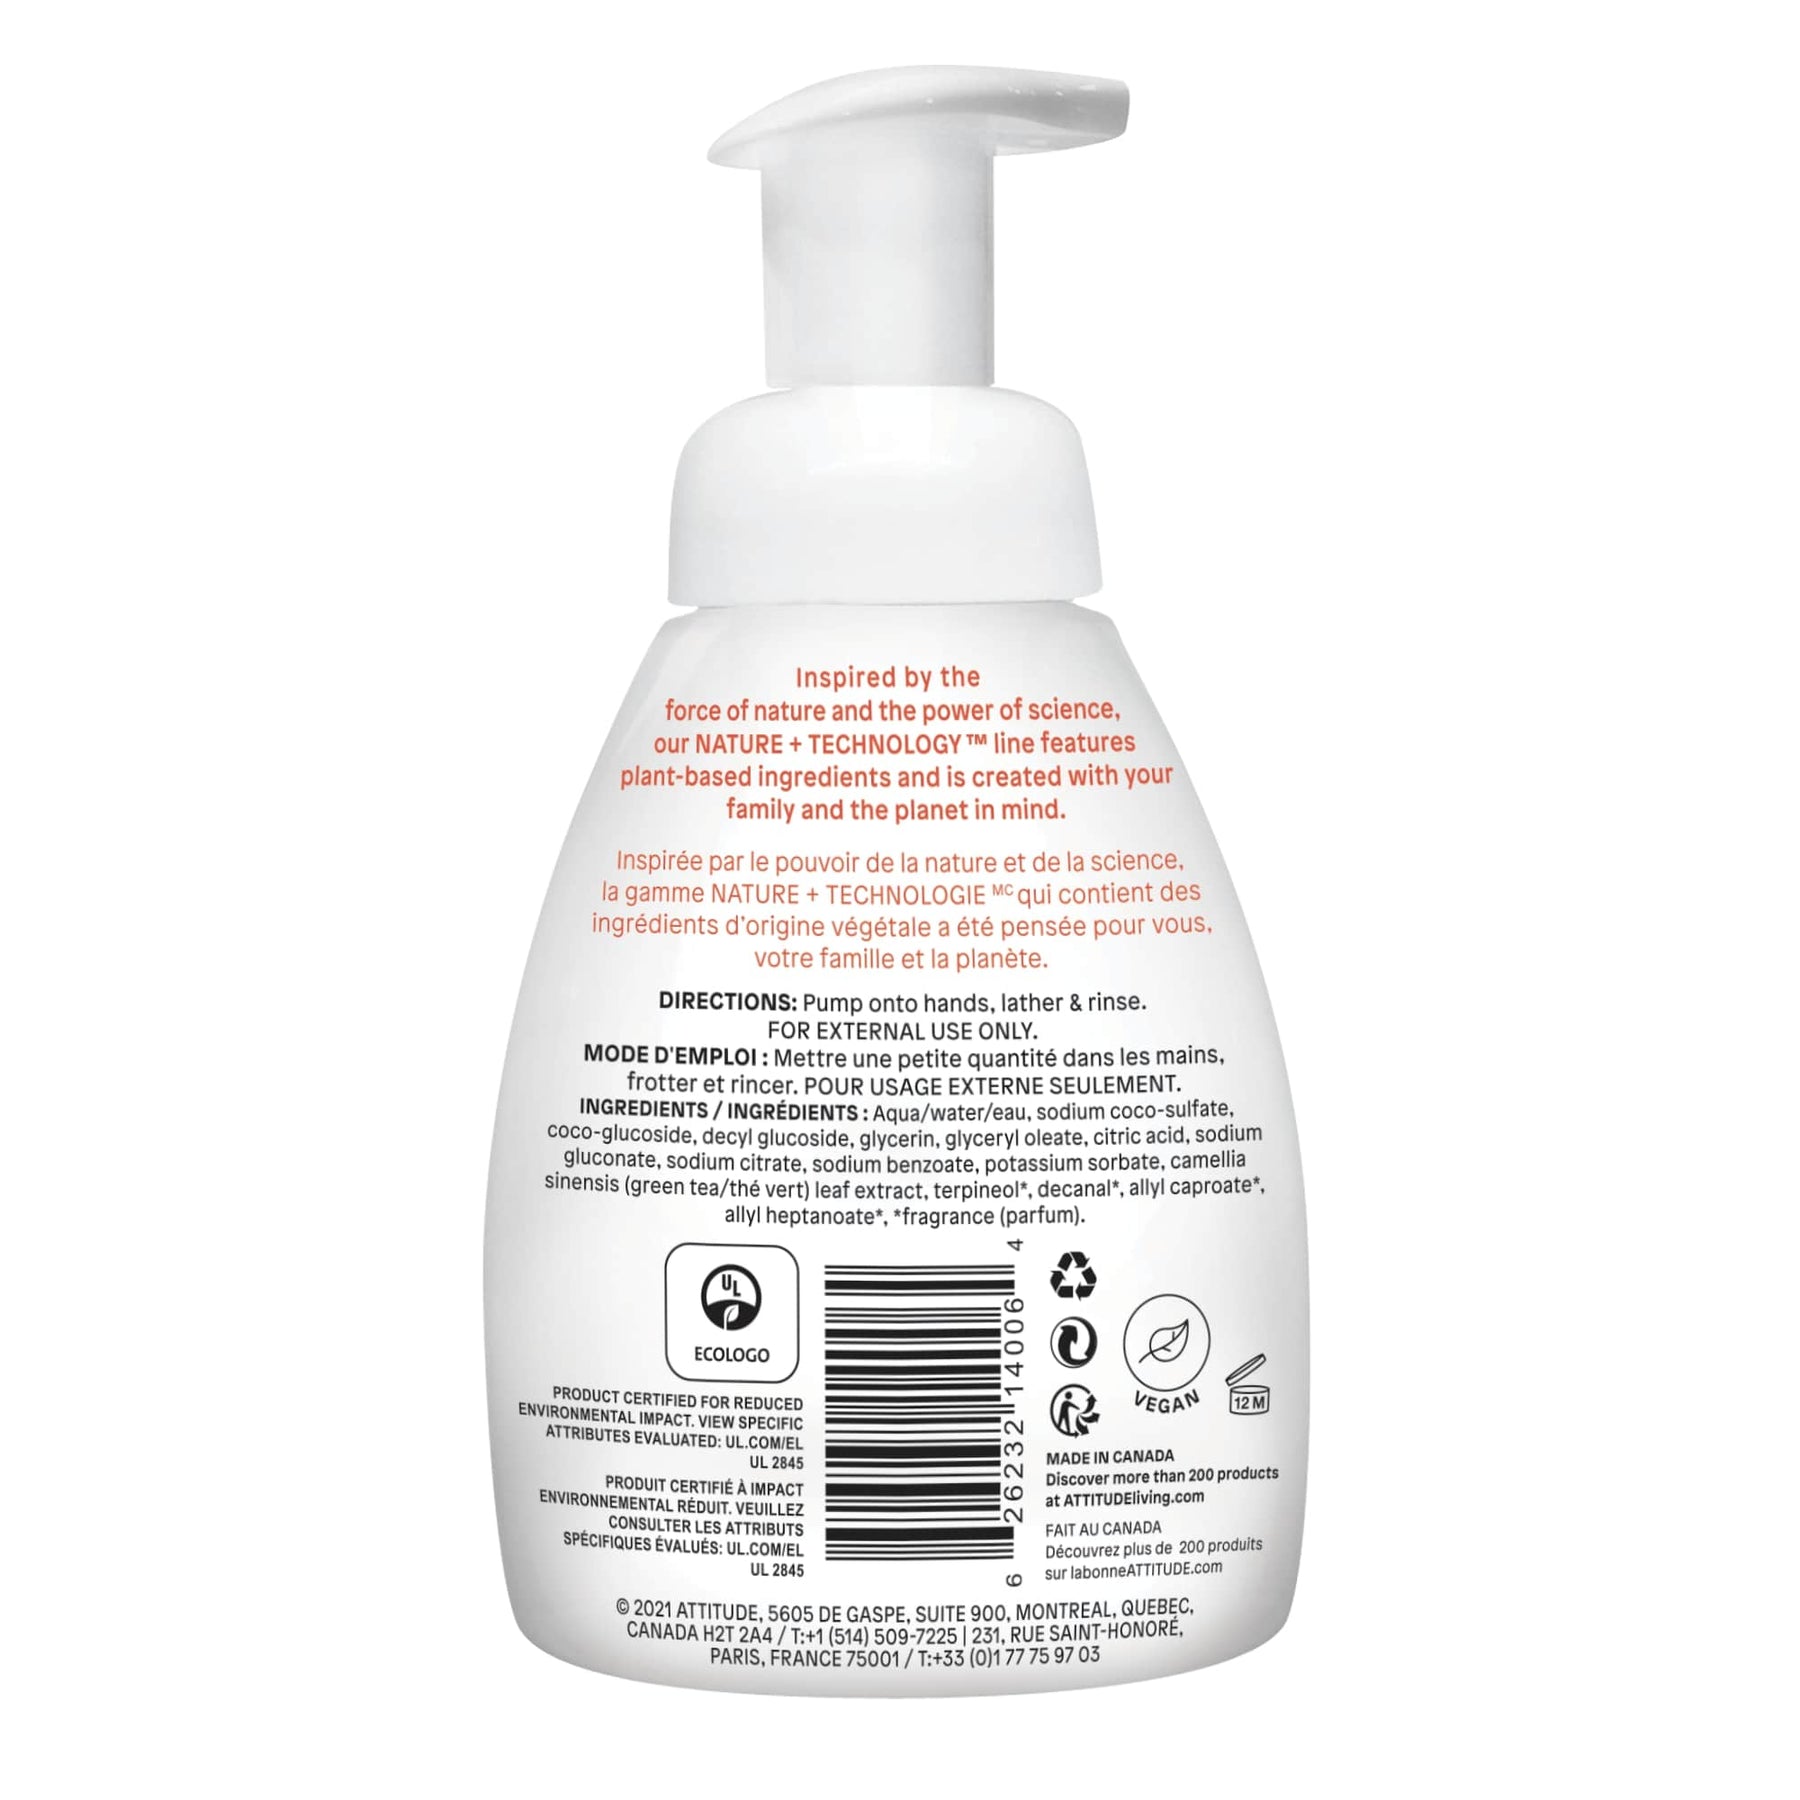 Foaming Hand Soap - ProCare Outlet by Attitude